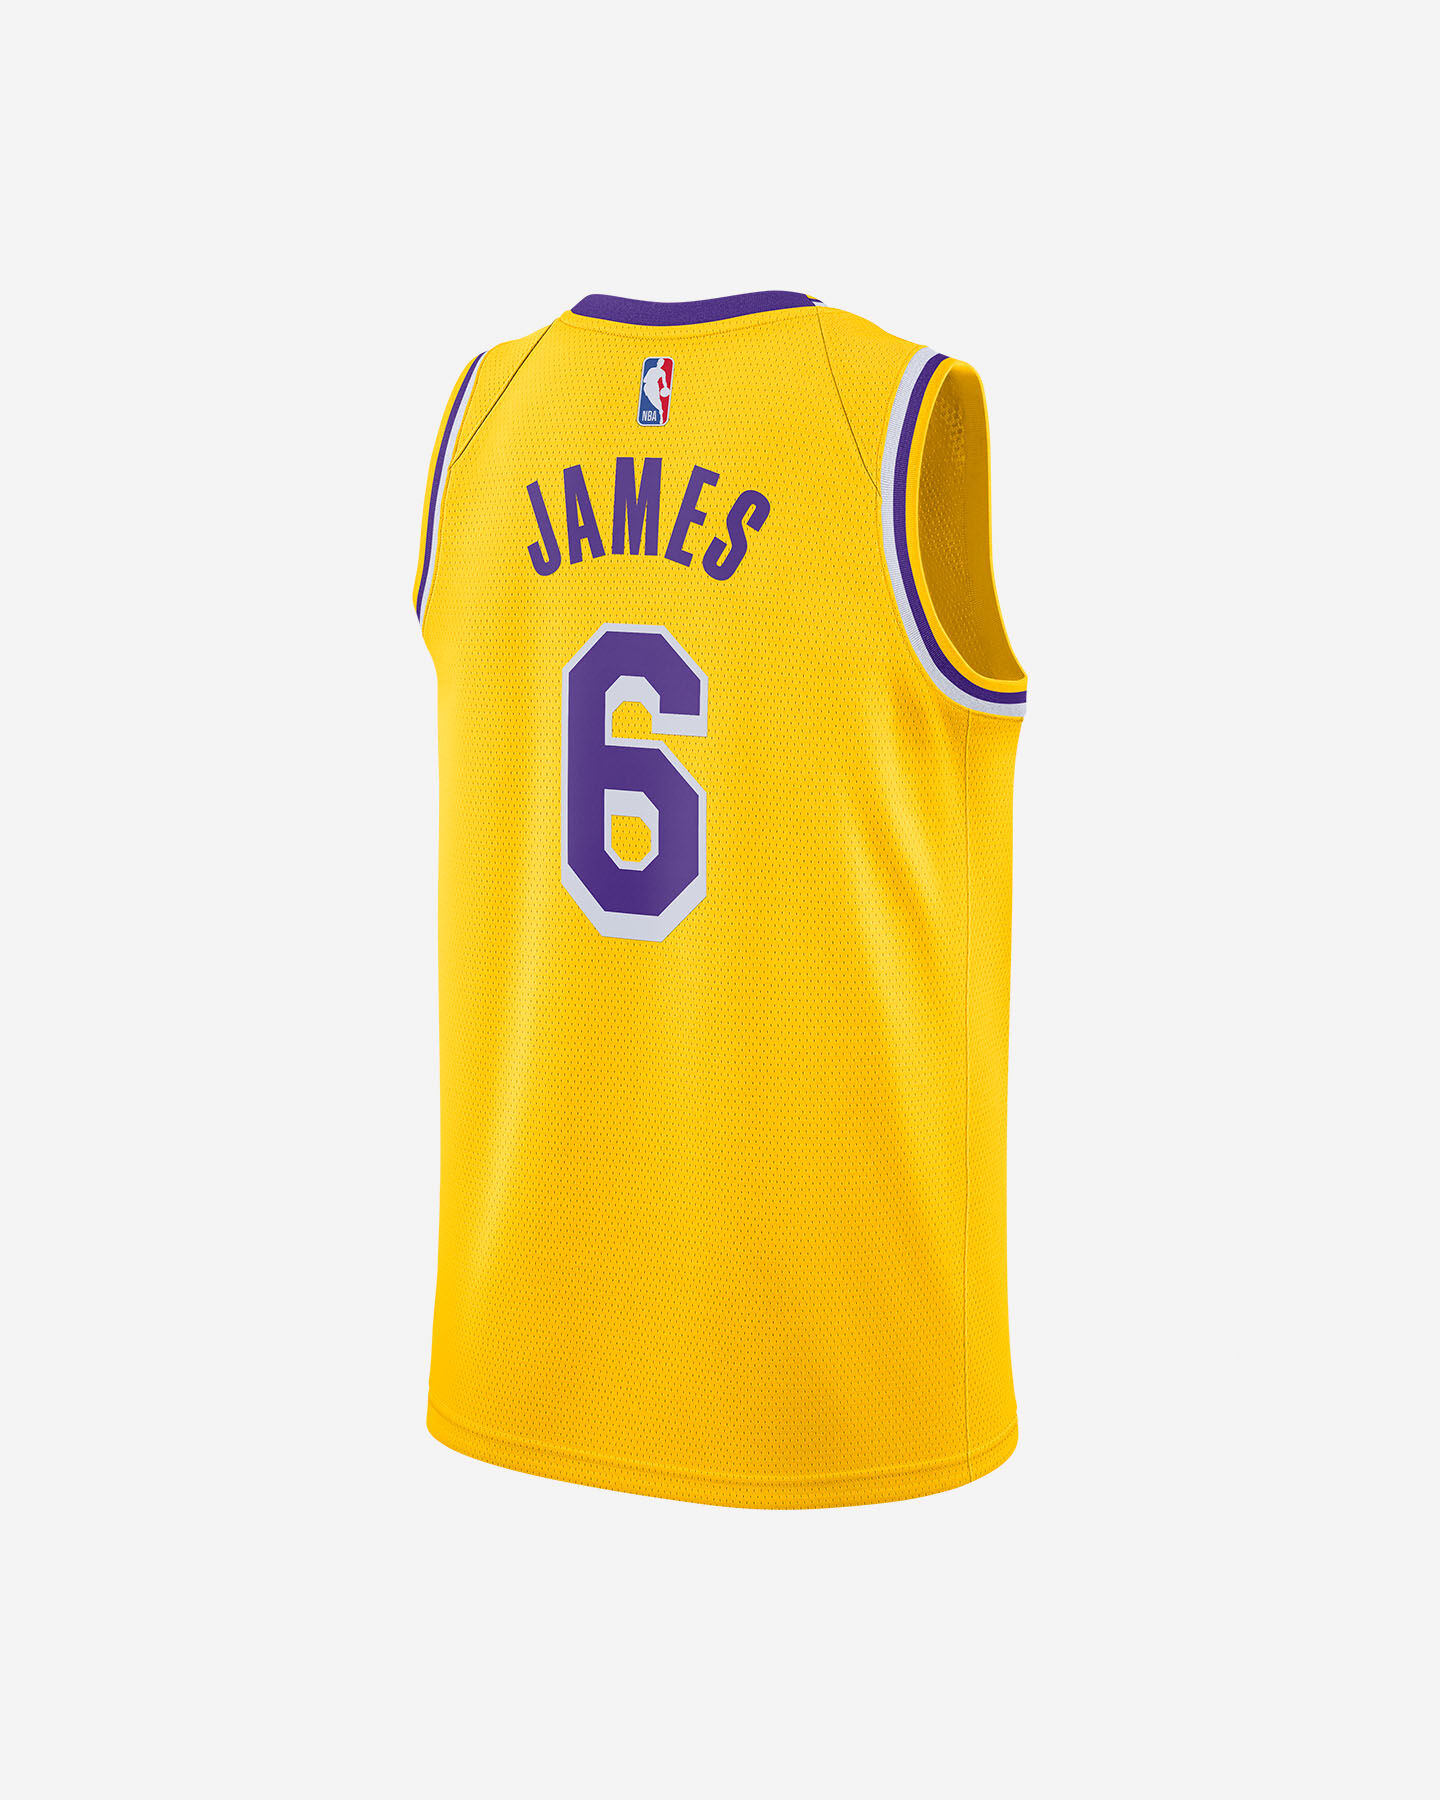  Canotta basket NIKE NBA LOS ANGELES LAKERS LEBRON JAMES M S5349695|738|S scatto 1